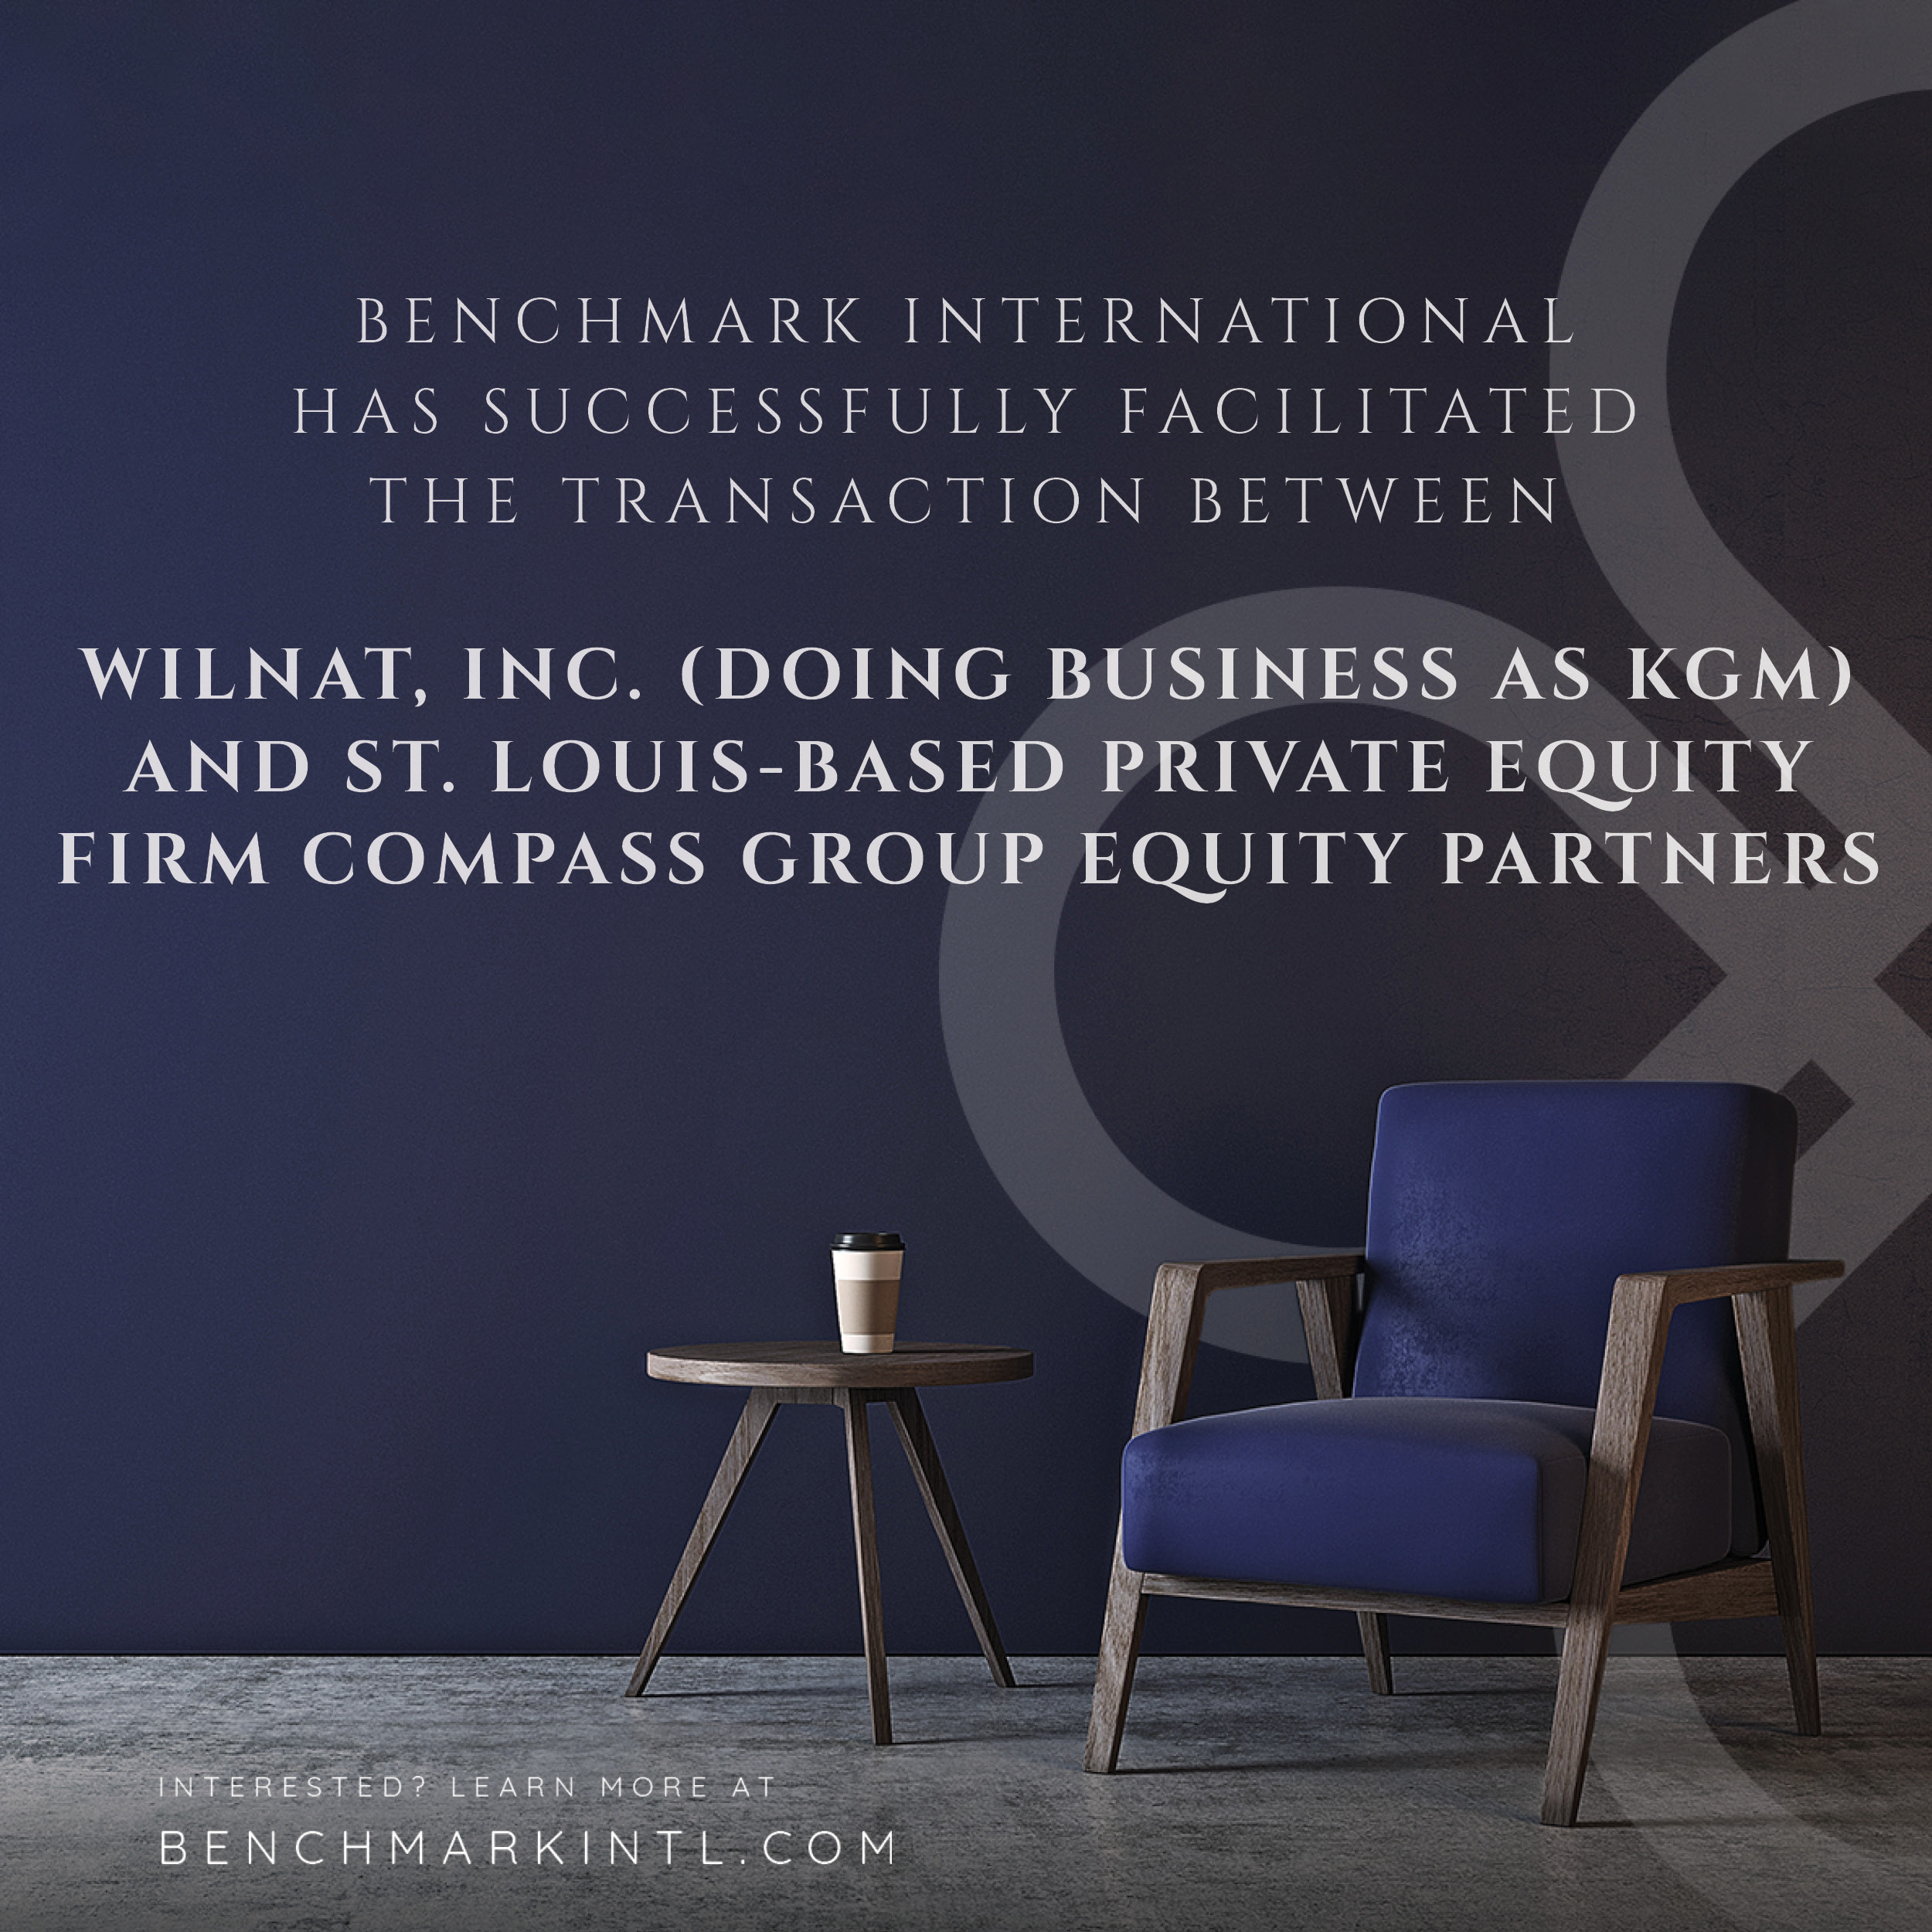 Deal_Completion_A_Wilnat,_Inc_DBA_KGM_and_St.Louis_Based_Private_Equity_Firm_Compass_Group_Equity_Partners2